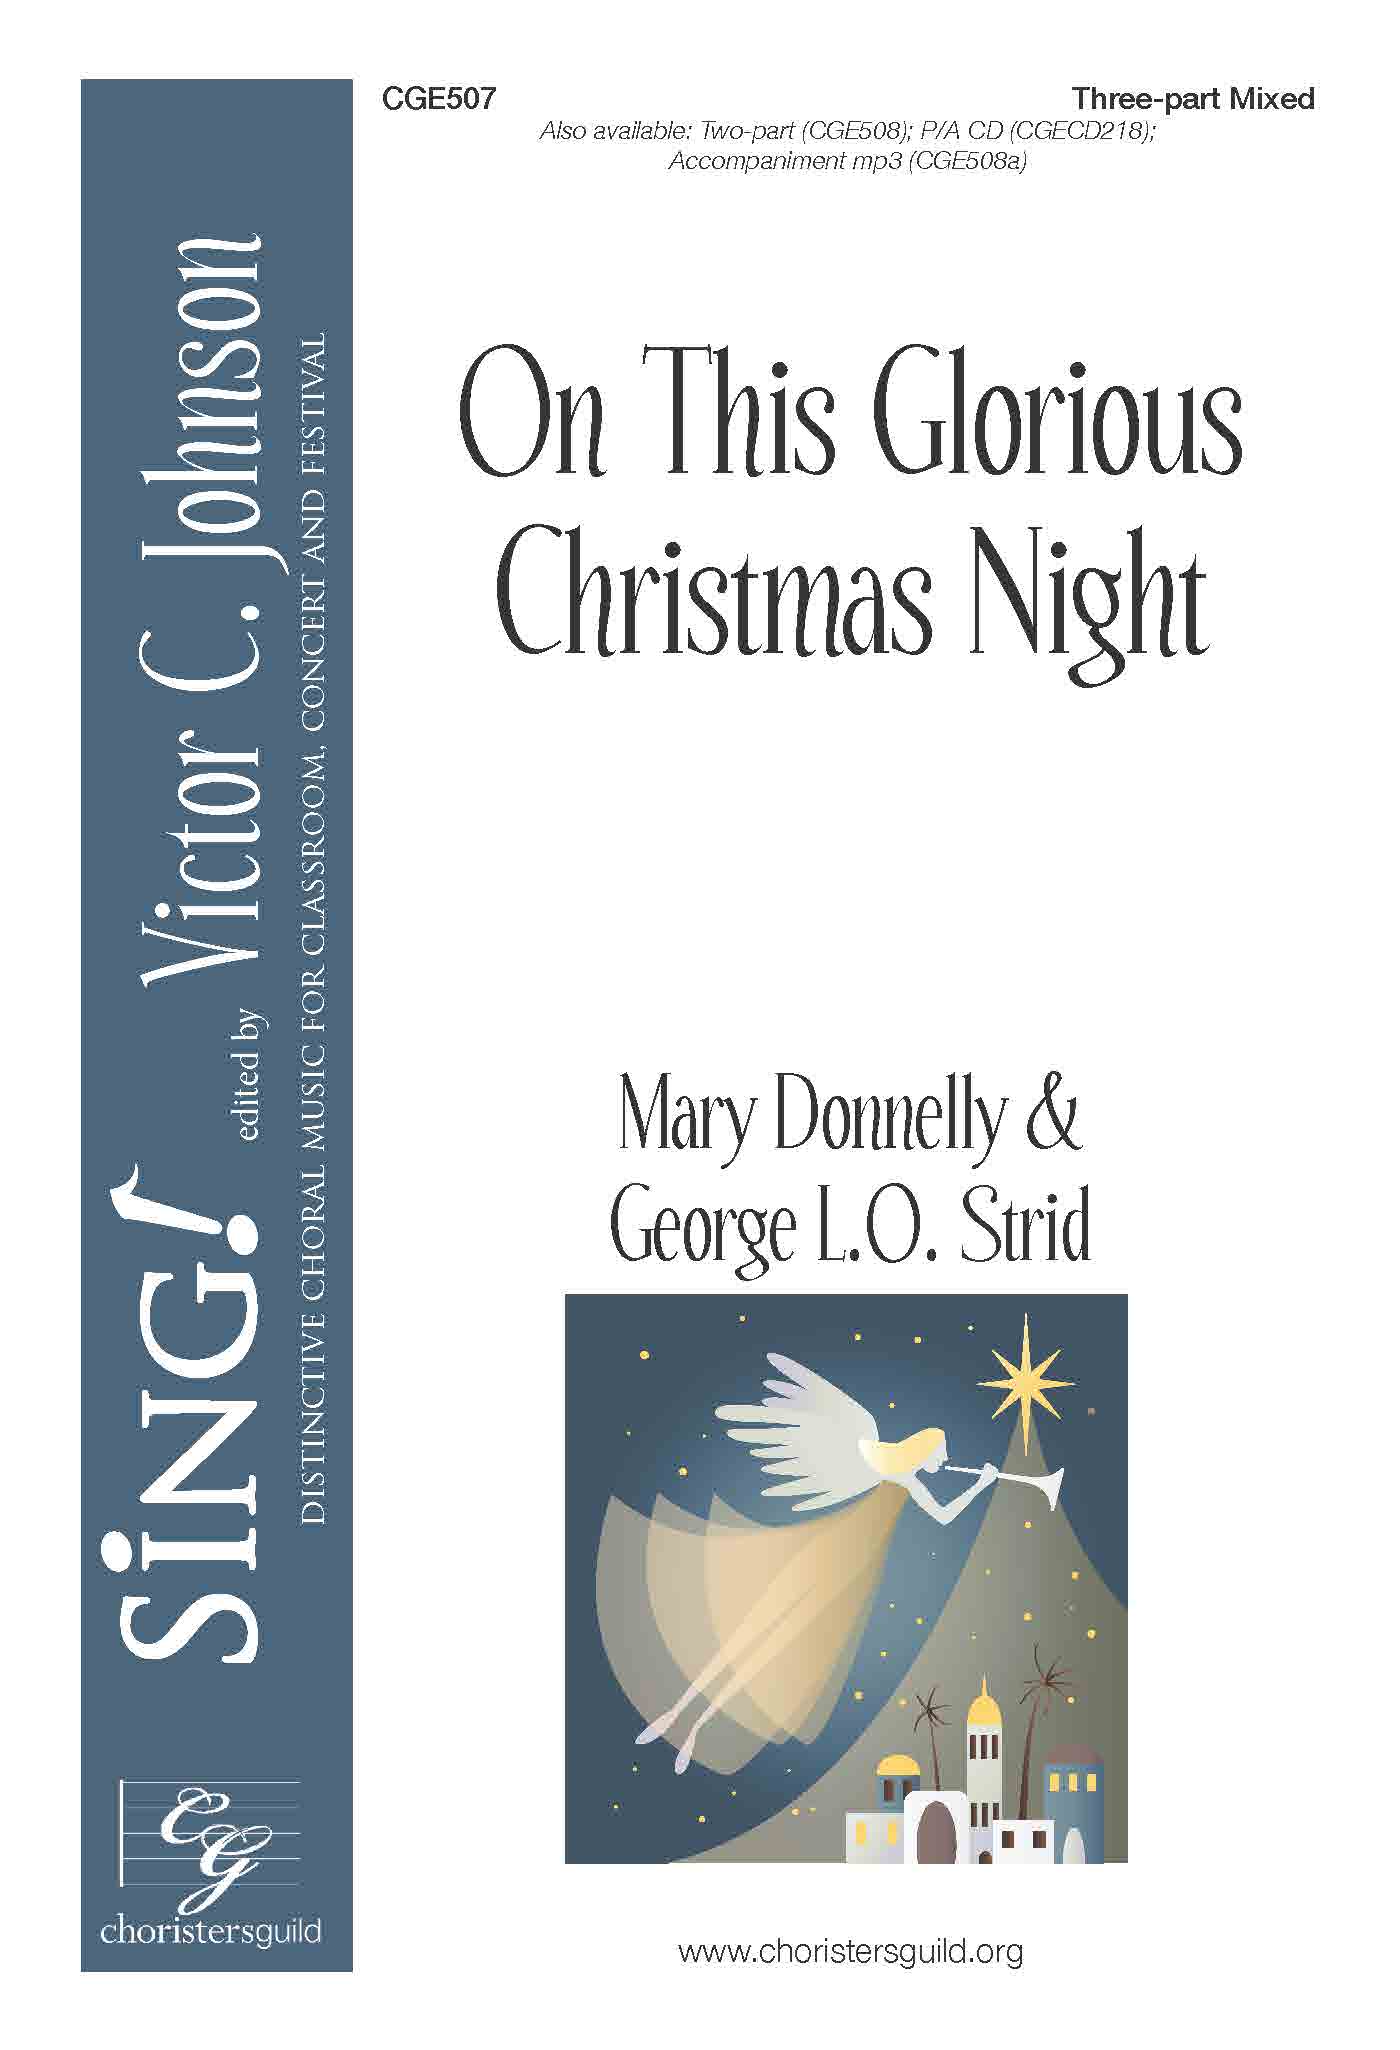 On This Glorious Christmas Night - Three-part Mixed